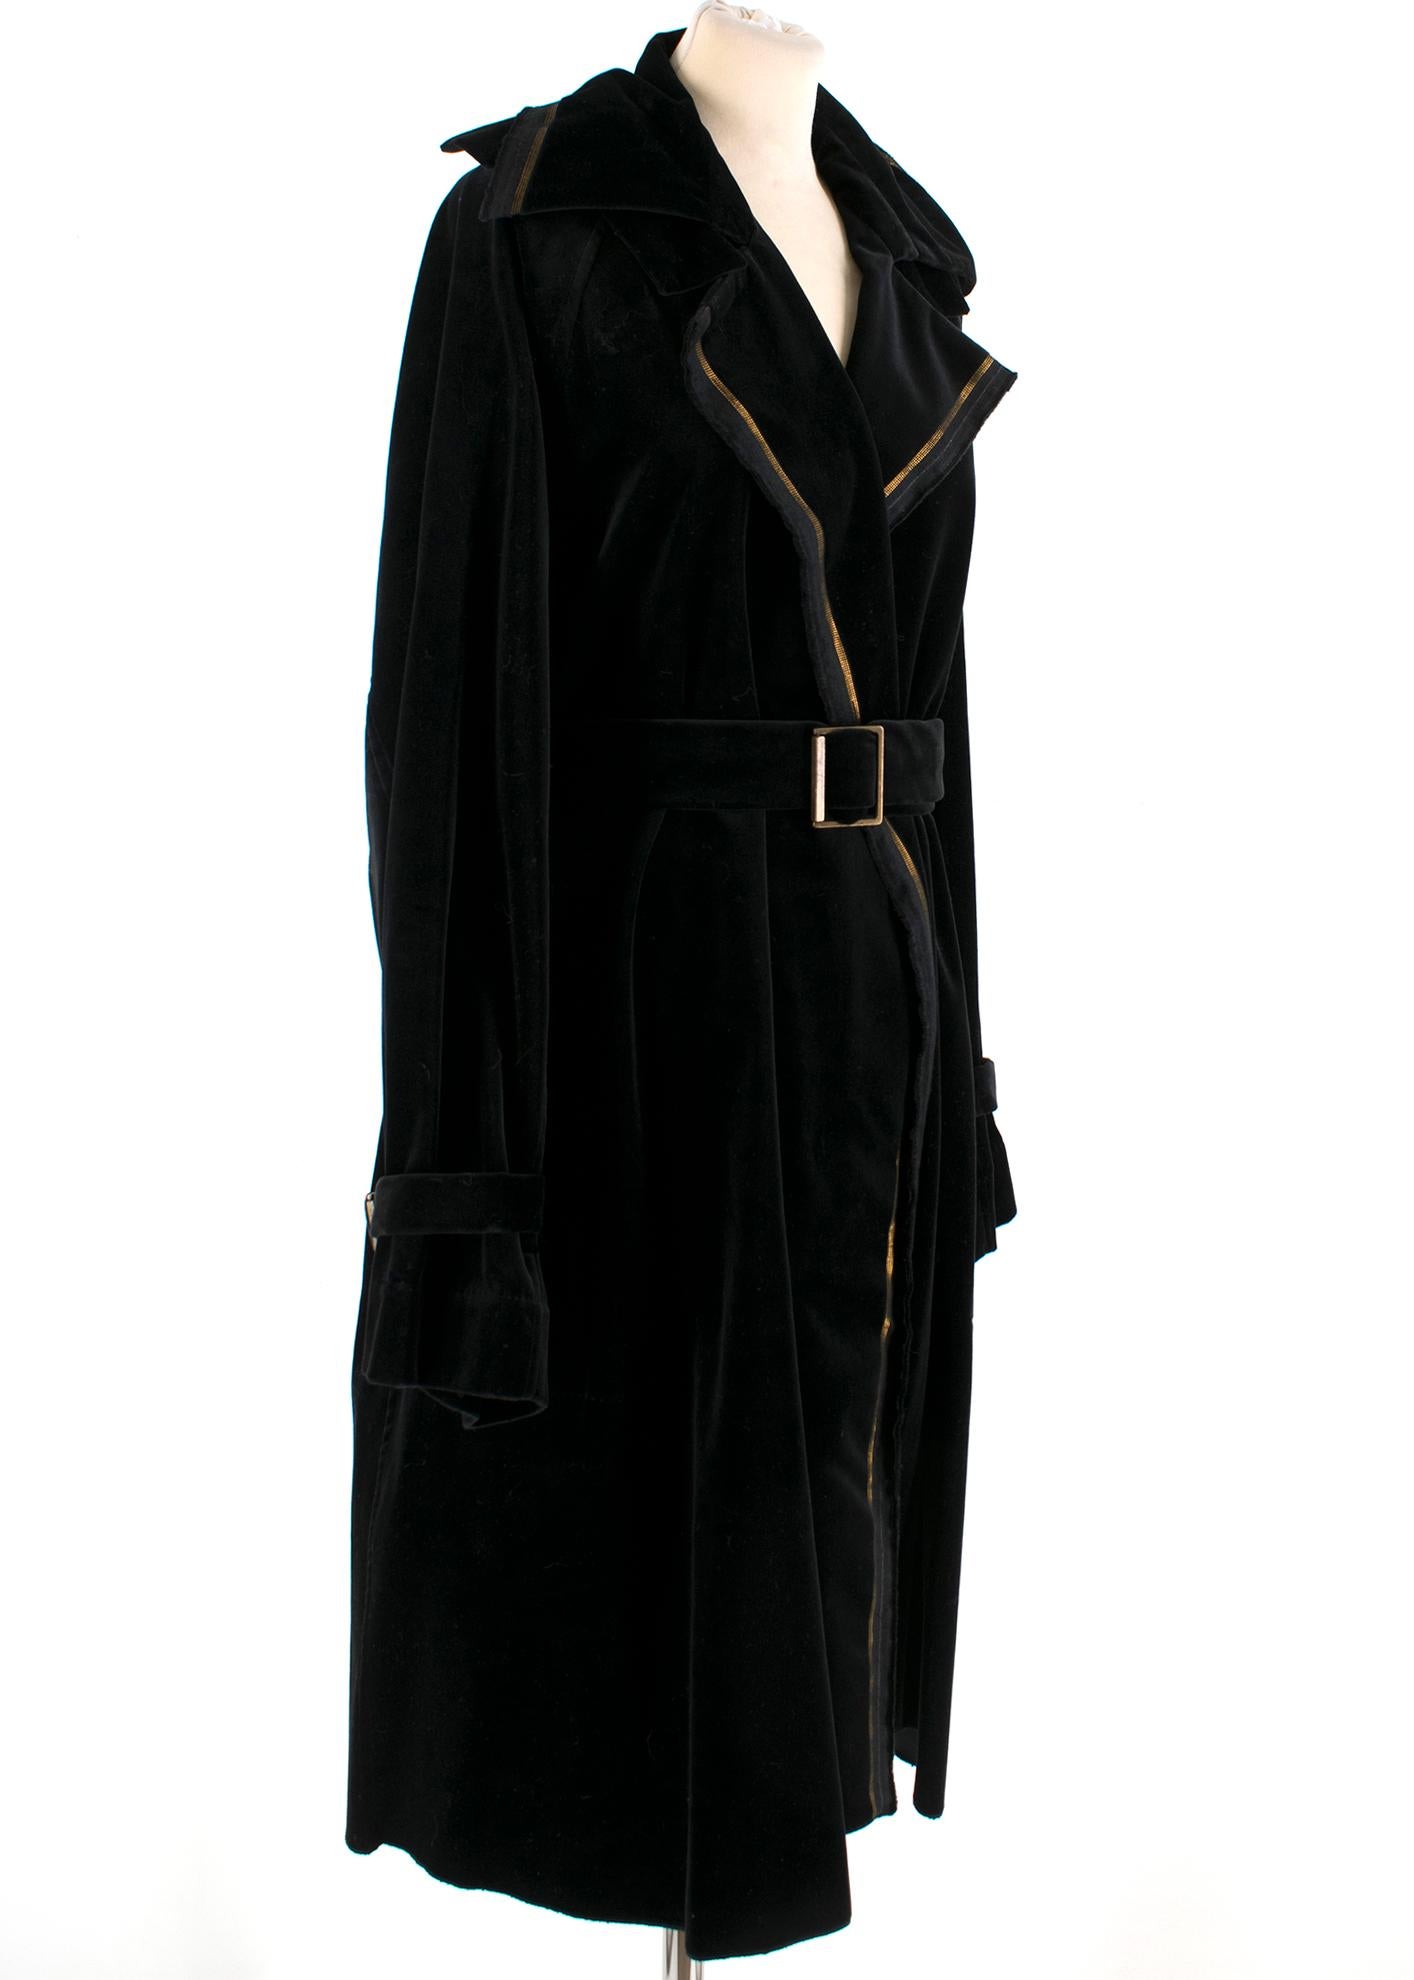 Lanvin Black Cotton Wrap Coat 

- Gold Tone Hardware 
- Belted Waist Fastening 
- Belt detail on Cuffs 
- Gold Tone Embroidery 
- Large Side Zip Pockets 

100% Cotton 

Dry Clean Only 

Sleeves: 78cm 
length: 100cm 